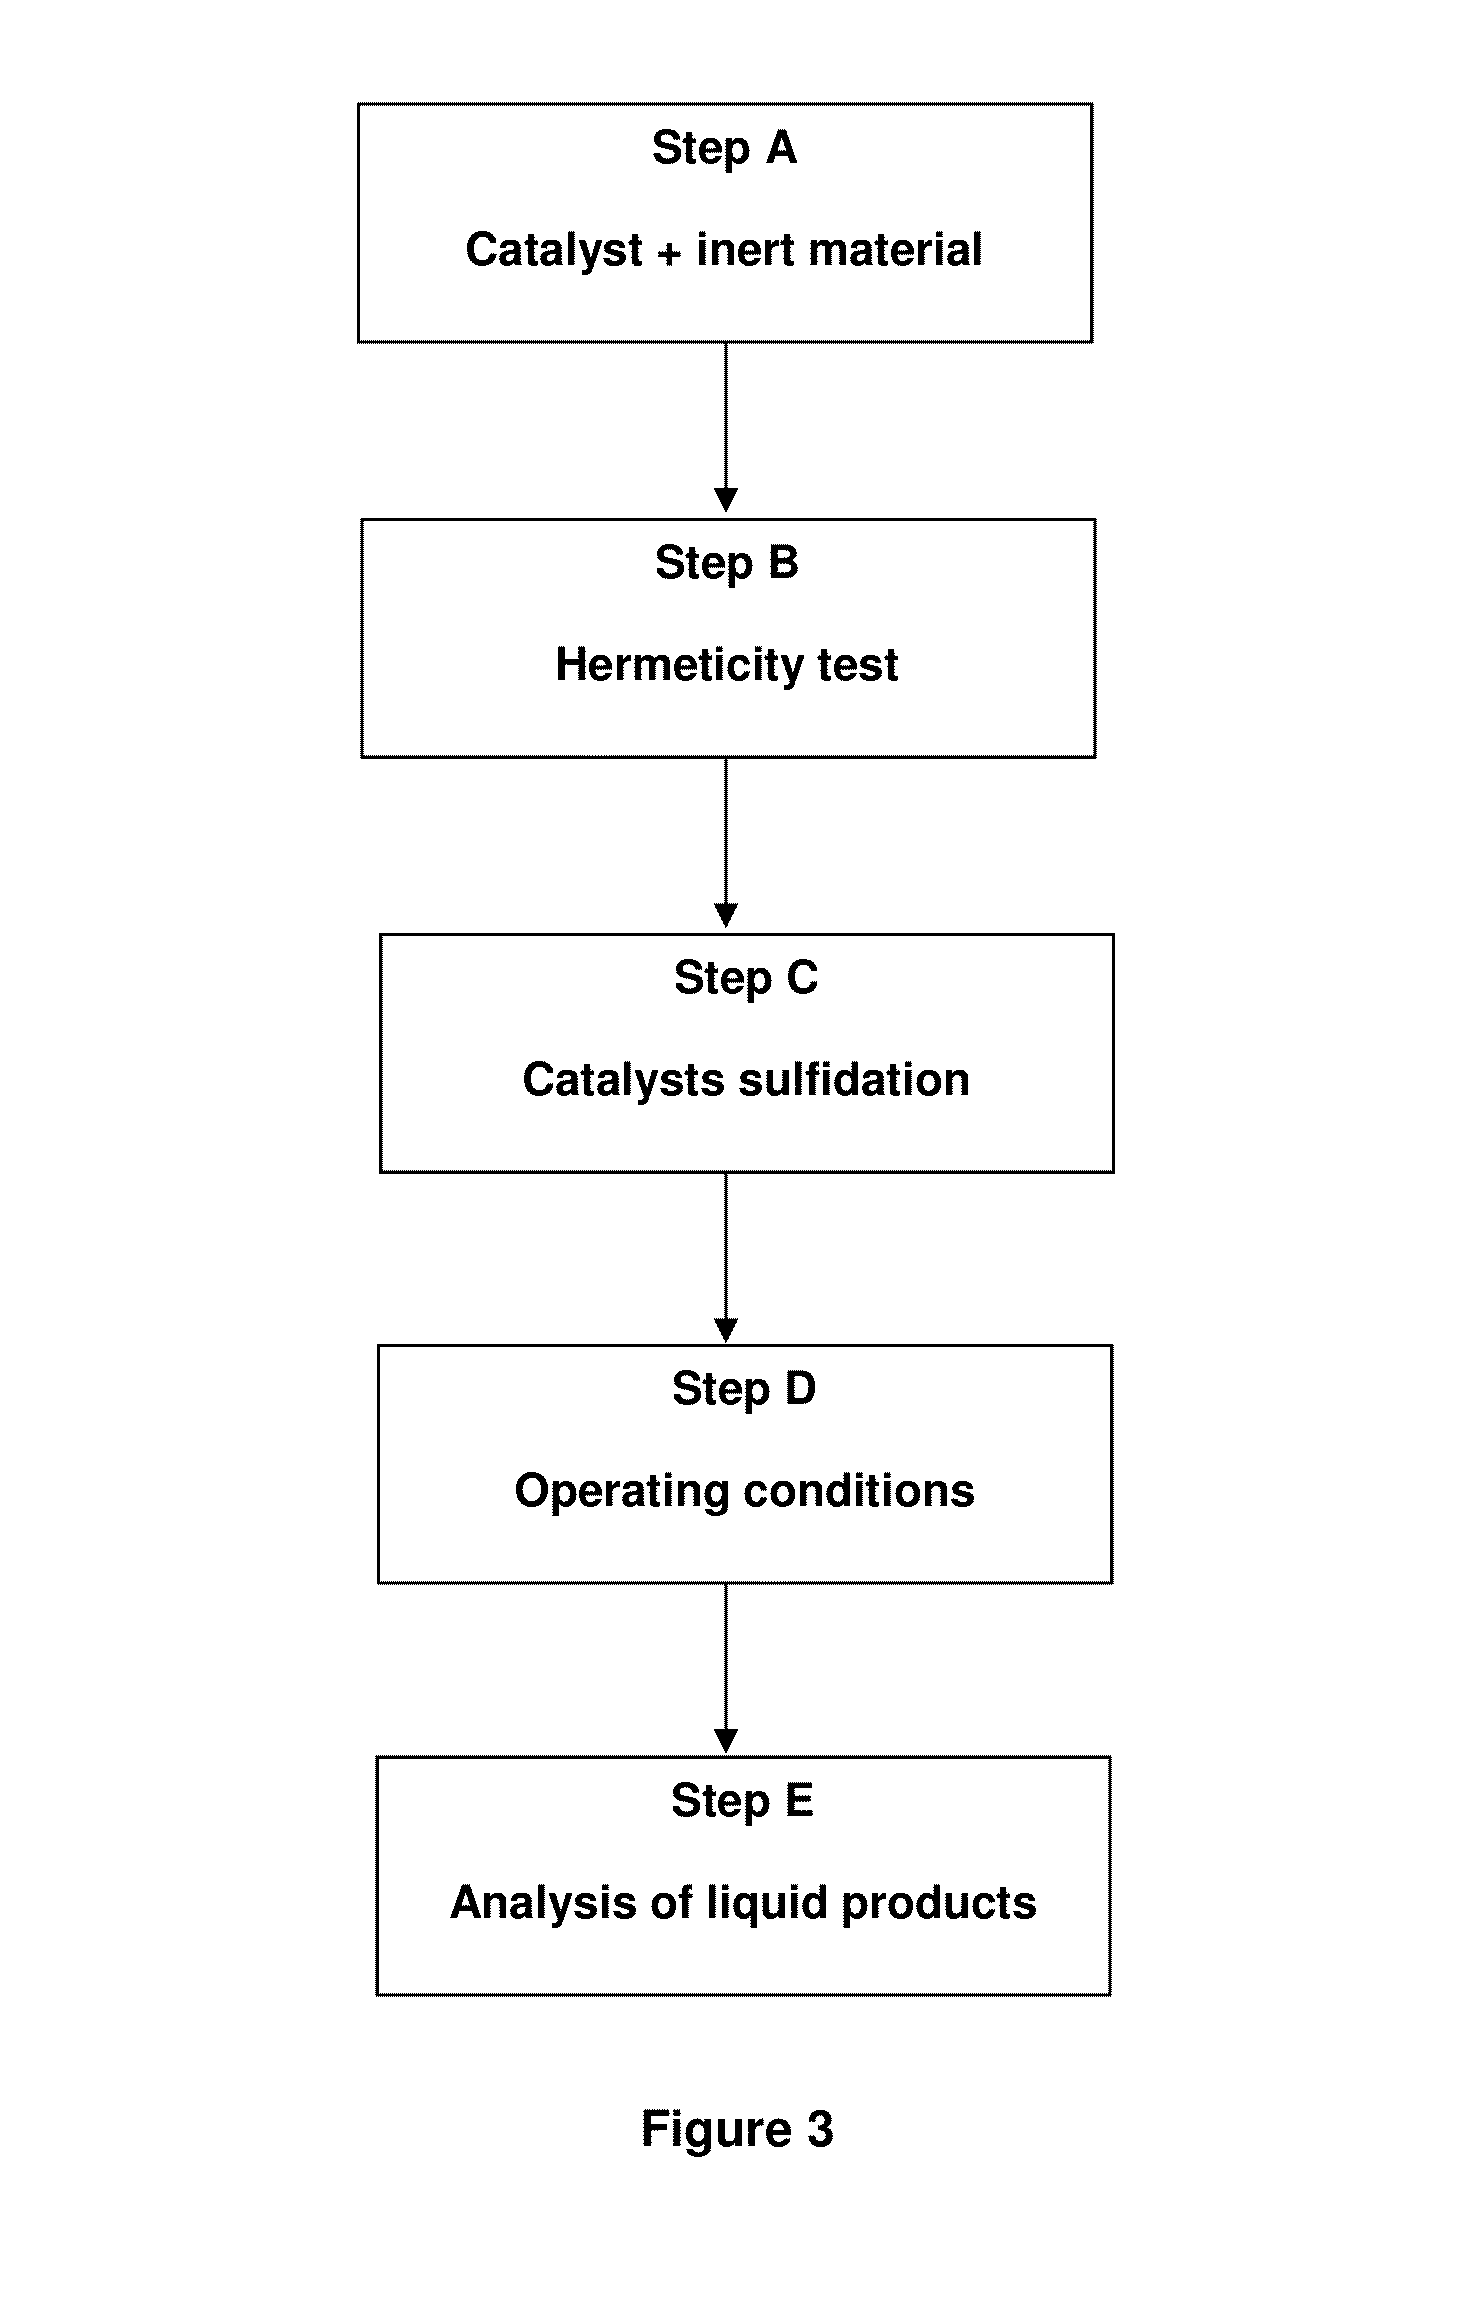 Mesoporous composite of molecular sieves for hydrocracking of heavy crude oils and residues